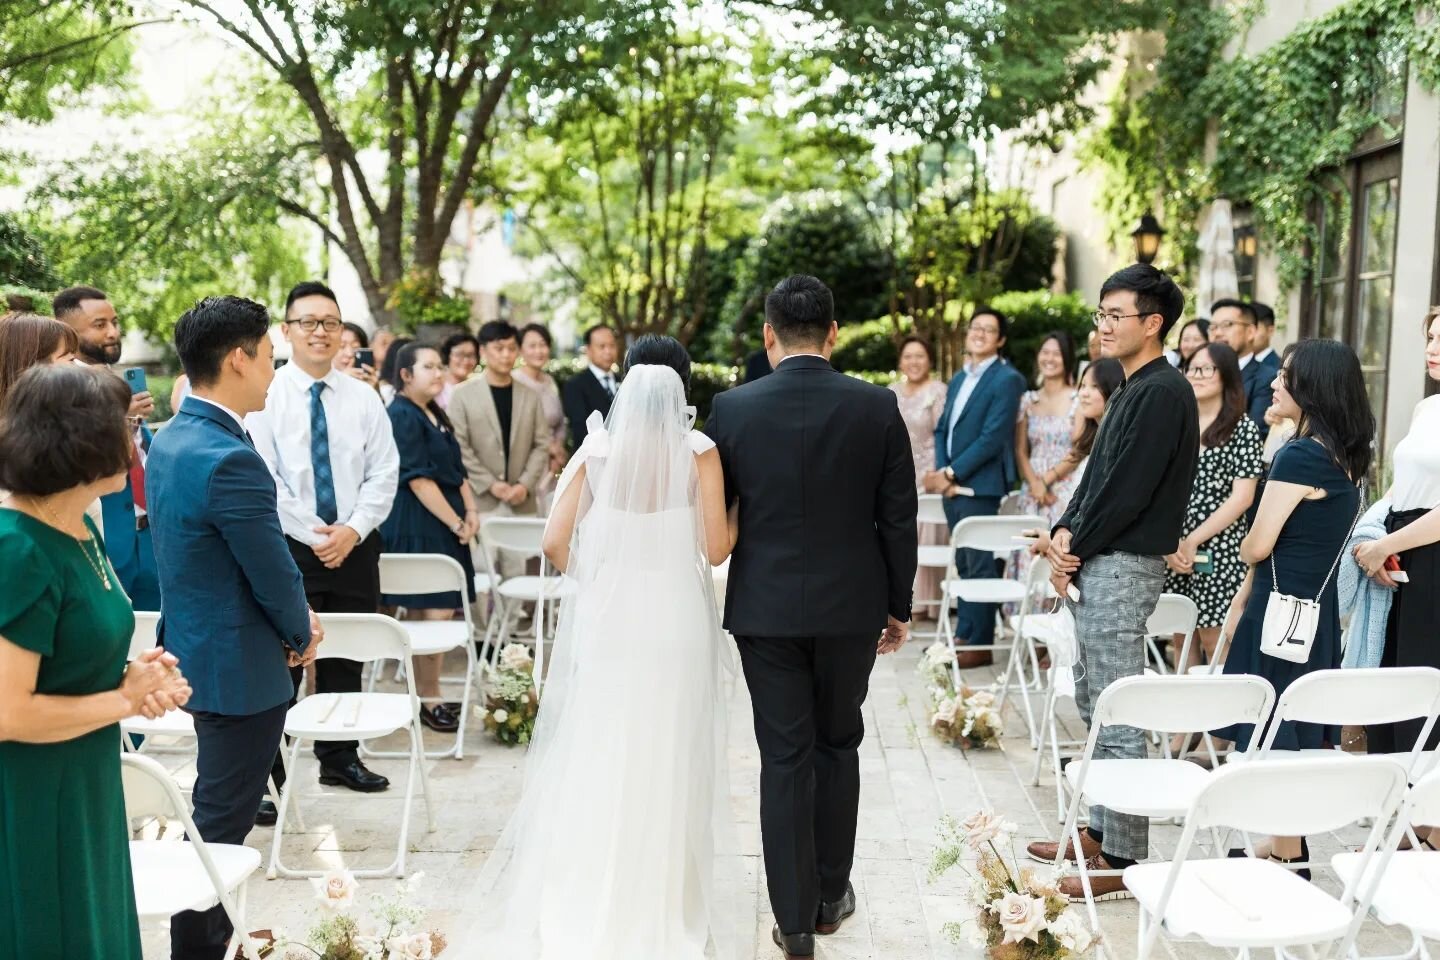 Walking down the aisle vs. Just married!